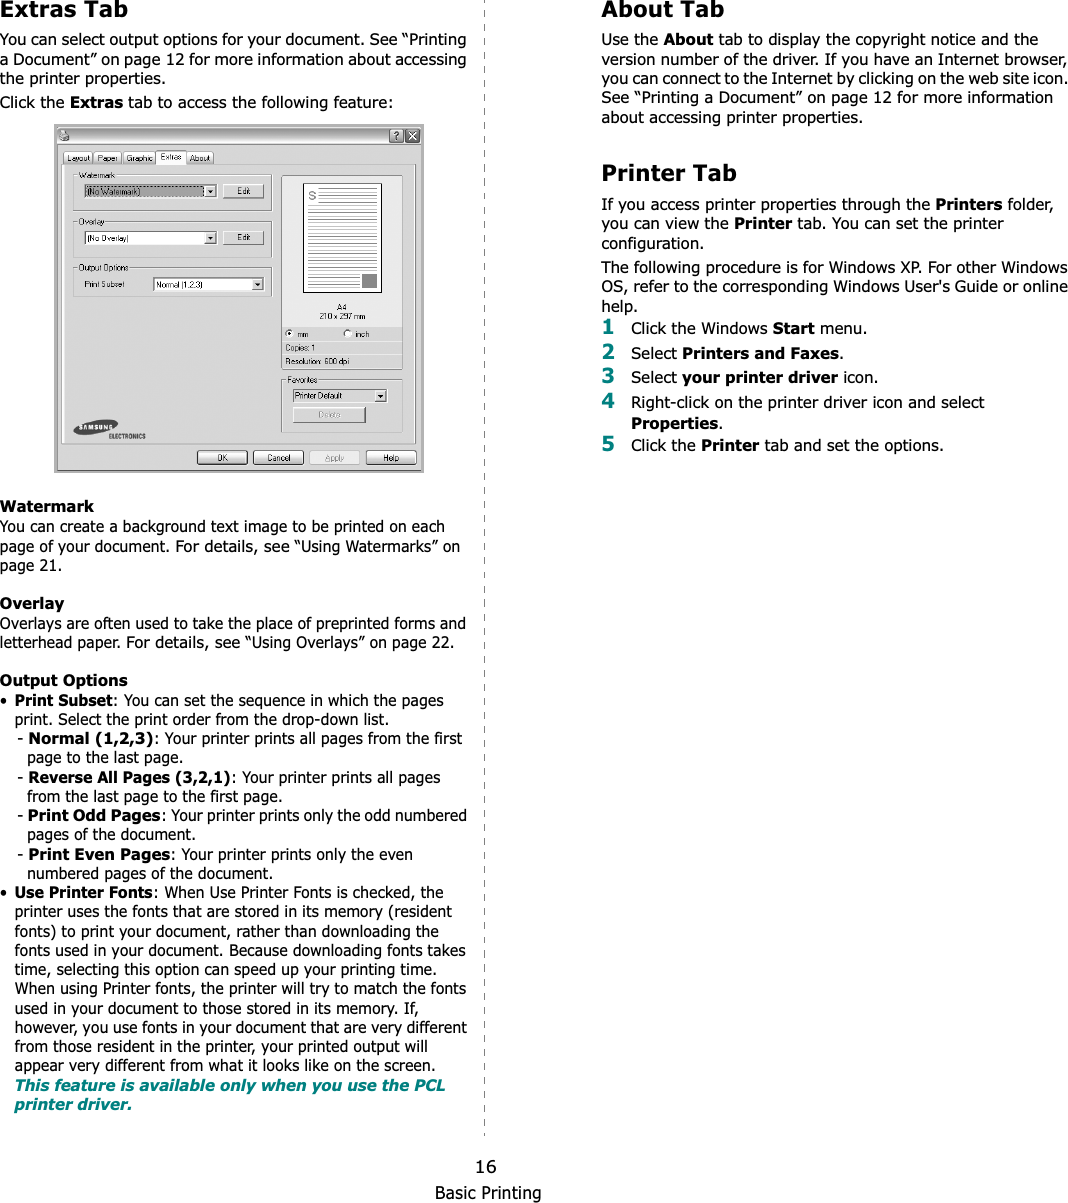 Basic Printing16Extras TabYou can select output options for your document. See “Printing a Document” on page 12 for more information about accessing the printer properties.Click the Extras tab to access the following feature:  WatermarkYou can create a background text image to be printed on each page of your document. For details, see “Using Watermarks” on page 21.OverlayOverlays are often used to take the place of preprinted forms and letterhead paper. For details, see “Using Overlays” on page 22.Output Options•Print Subset: You can set the sequence in which the pages print. Select the print order from the drop-down list.-Normal (1,2,3): Your printer prints all pages from the first page to the last page.-Reverse All Pages (3,2,1): Your printer prints all pages from the last page to the first page.-Print Odd Pages: Your printer prints only the odd numbered pages of the document.-Print Even Pages: Your printer prints only the even numbered pages of the document.•Use Printer Fonts: When Use Printer Fonts is checked, the printer uses the fonts that are stored in its memory (resident fonts) to print your document, rather than downloading the fonts used in your document. Because downloading fonts takes time, selecting this option can speed up your printing time. When using Printer fonts, the printer will try to match the fonts used in your document to those stored in its memory. If, however, you use fonts in your document that are very different from those resident in the printer, your printed output will appear very different from what it looks like on the screen.  This feature is available only when you use the PCL printer driver.About TabUse the About tab to display the copyright notice and the version number of the driver. If you have an Internet browser, you can connect to the Internet by clicking on the web site icon. See “Printing a Document” on page 12 for more information about accessing printer properties.Printer TabIf you access printer properties through the Printers folder, you can view the Printer tab. You can set the printer configuration.The following procedure is for Windows XP. For other Windows OS, refer to the corresponding Windows User&apos;s Guide or online help.1Click the Windows Start menu. 2Select Printers and Faxes.3Select your printer driver icon. 4Right-click on the printer driver icon and select Properties.5Click the Printer tab and set the options.  